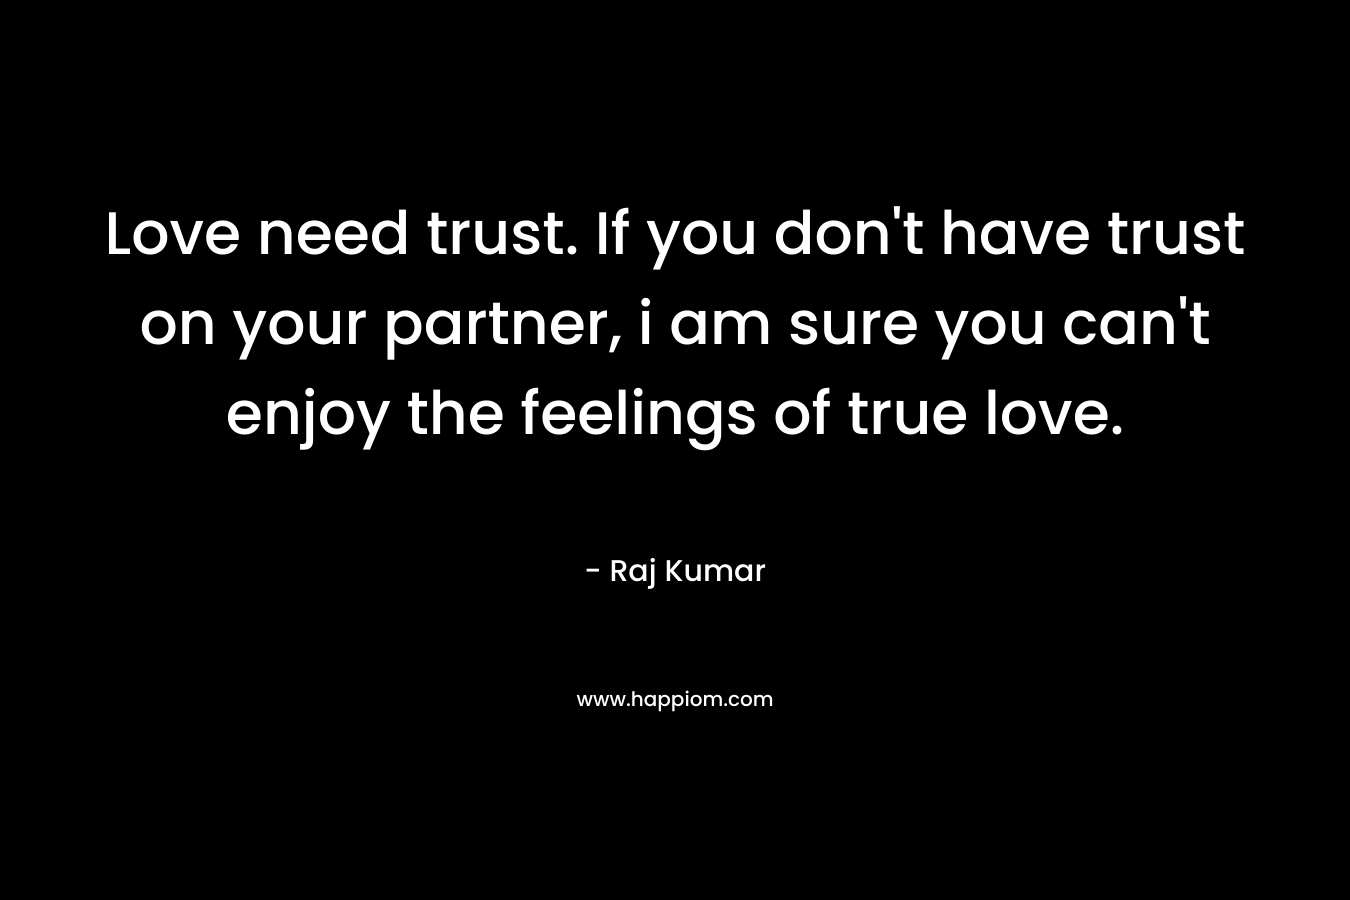 Love need trust. If you don't have trust on your partner, i am sure you can't enjoy the feelings of true love.